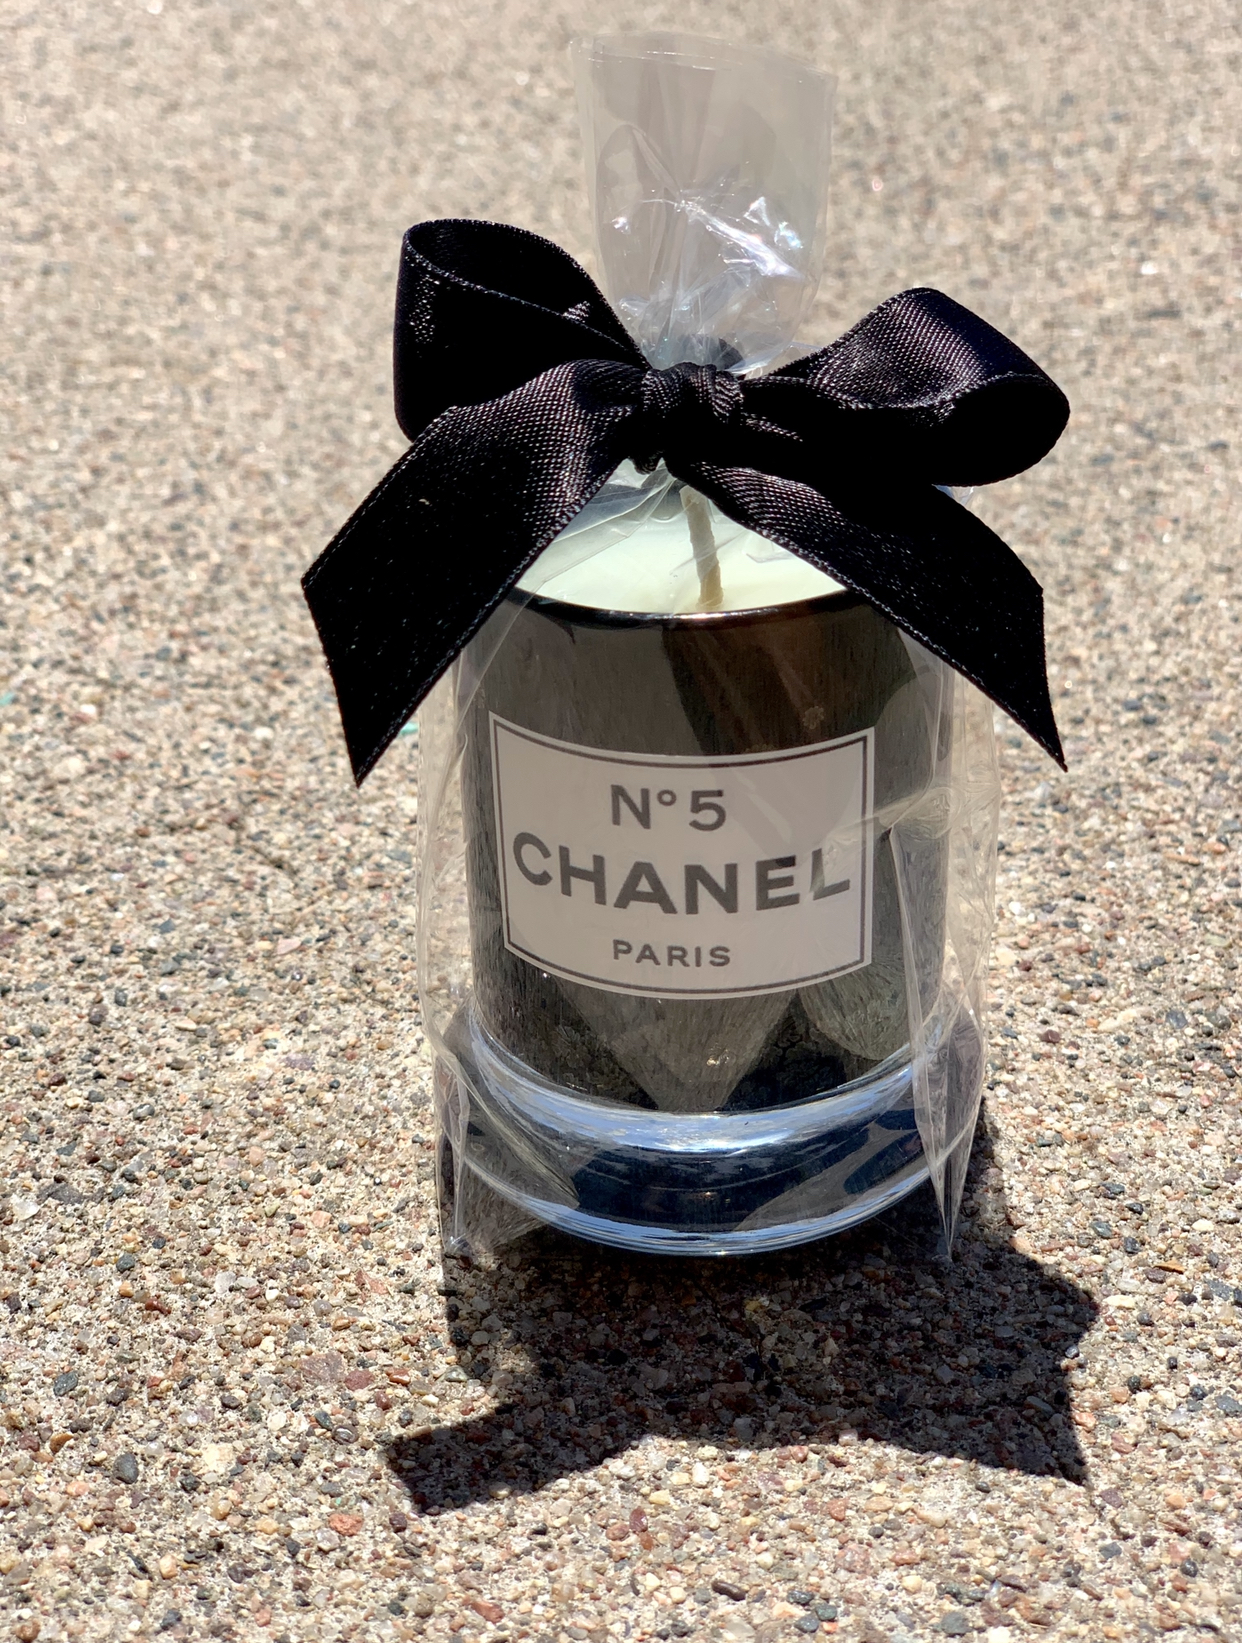 Chanel N5 Candle - Send to Phoenix, AZ Today!